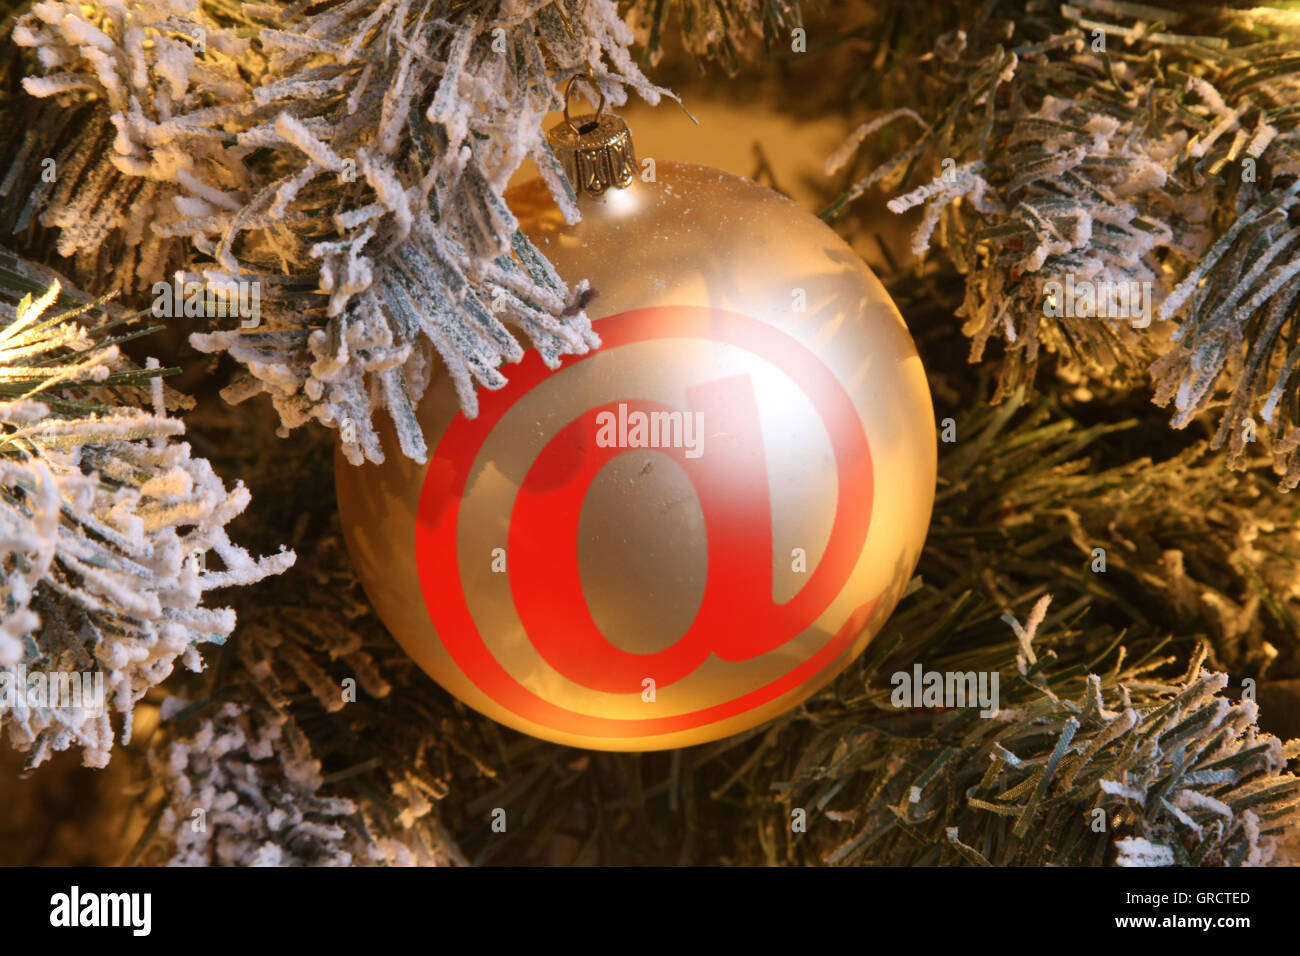 Christmas Tree Ornament With At Sign Stock Photo